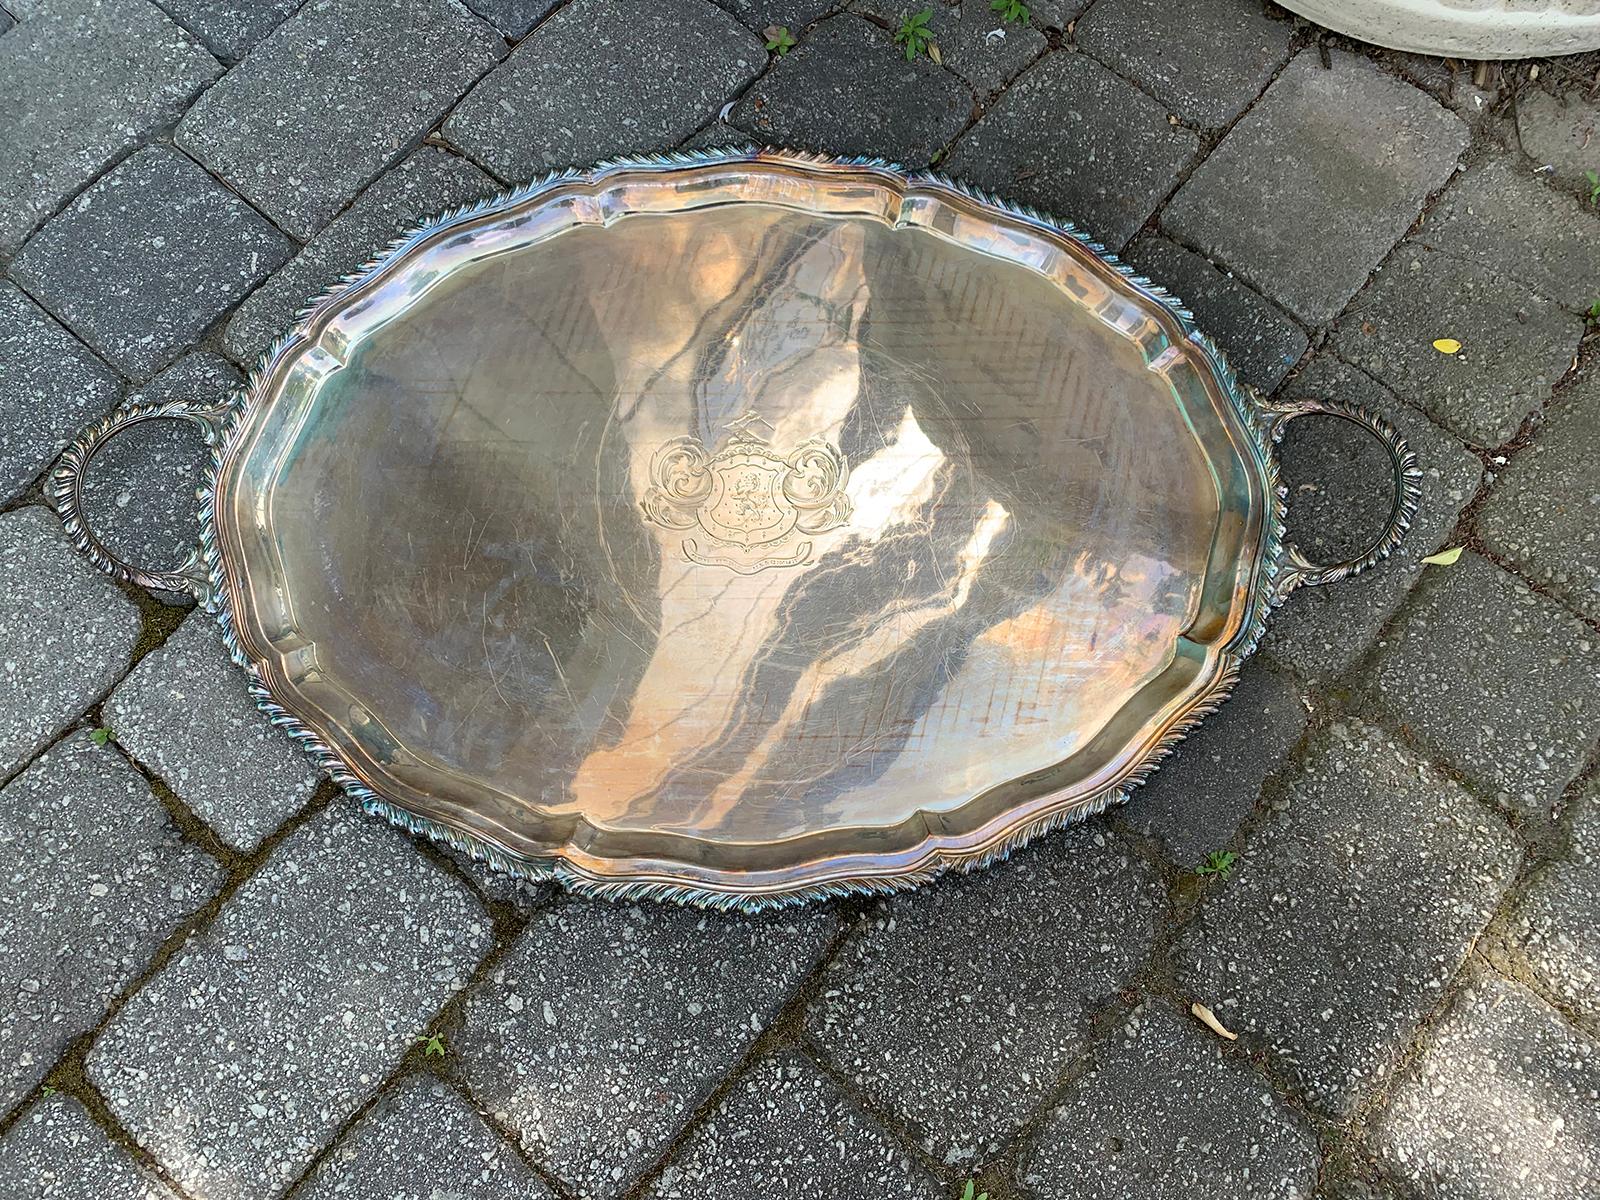 19th century large Sheffield silver plate serving tray with beautiful crest
Blue tinge is the reflection of our turquoise front doors.